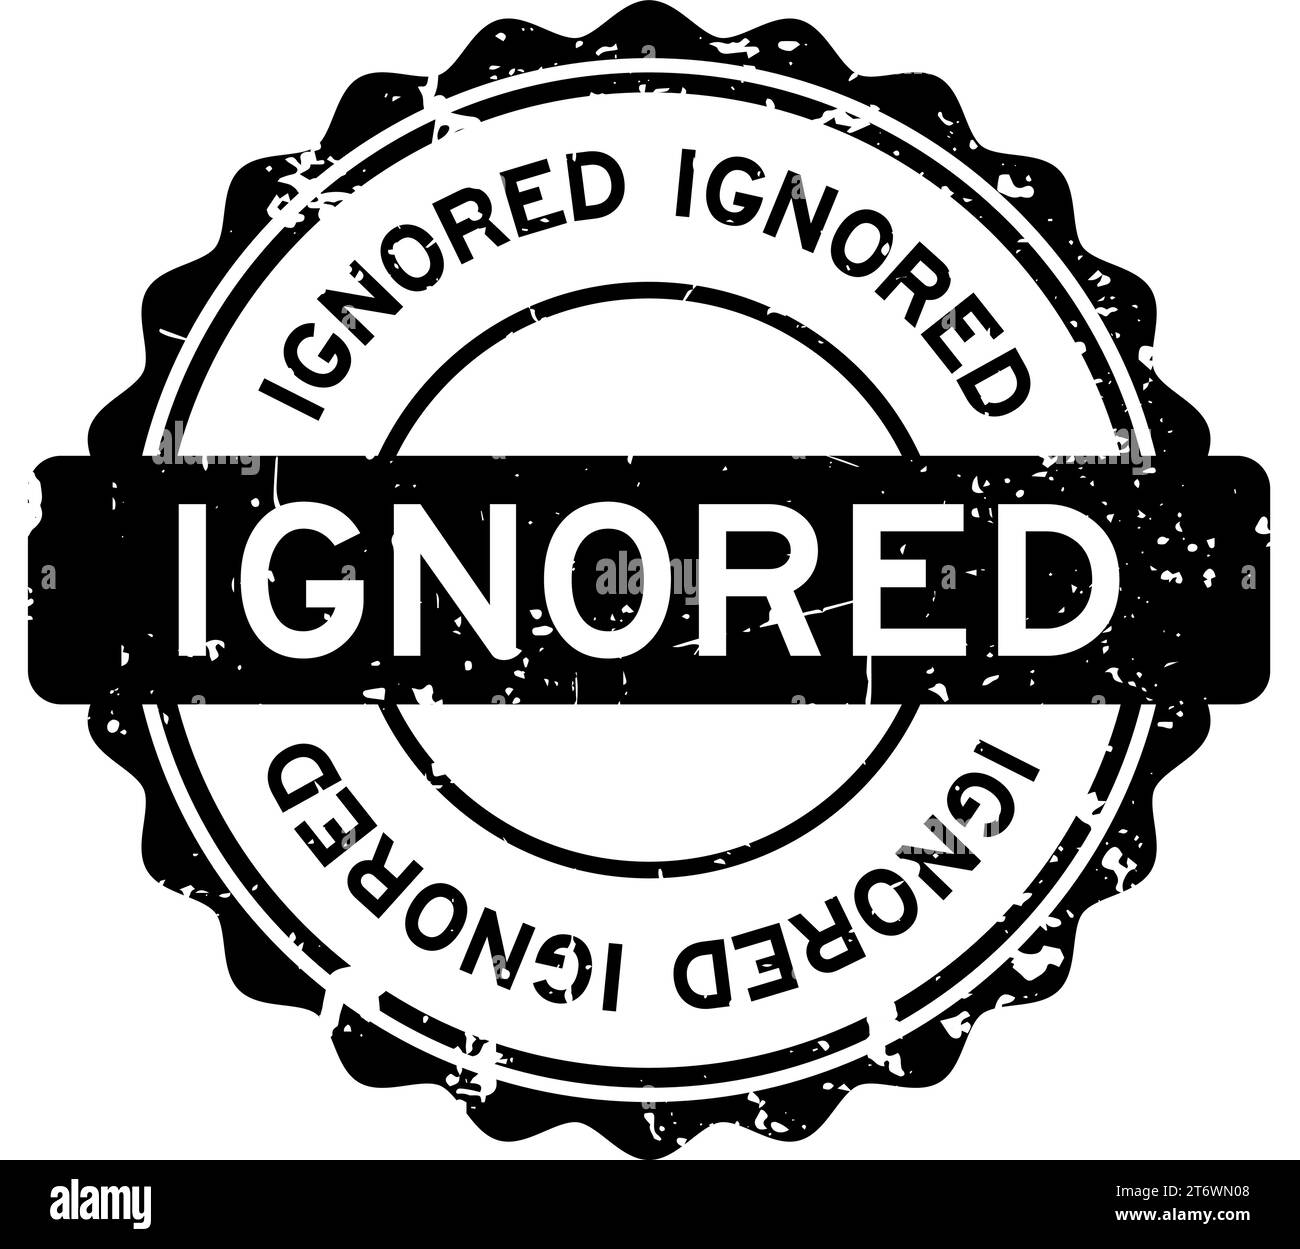 Grunge black ignored word round rubber seal stamp on white background Stock Vector